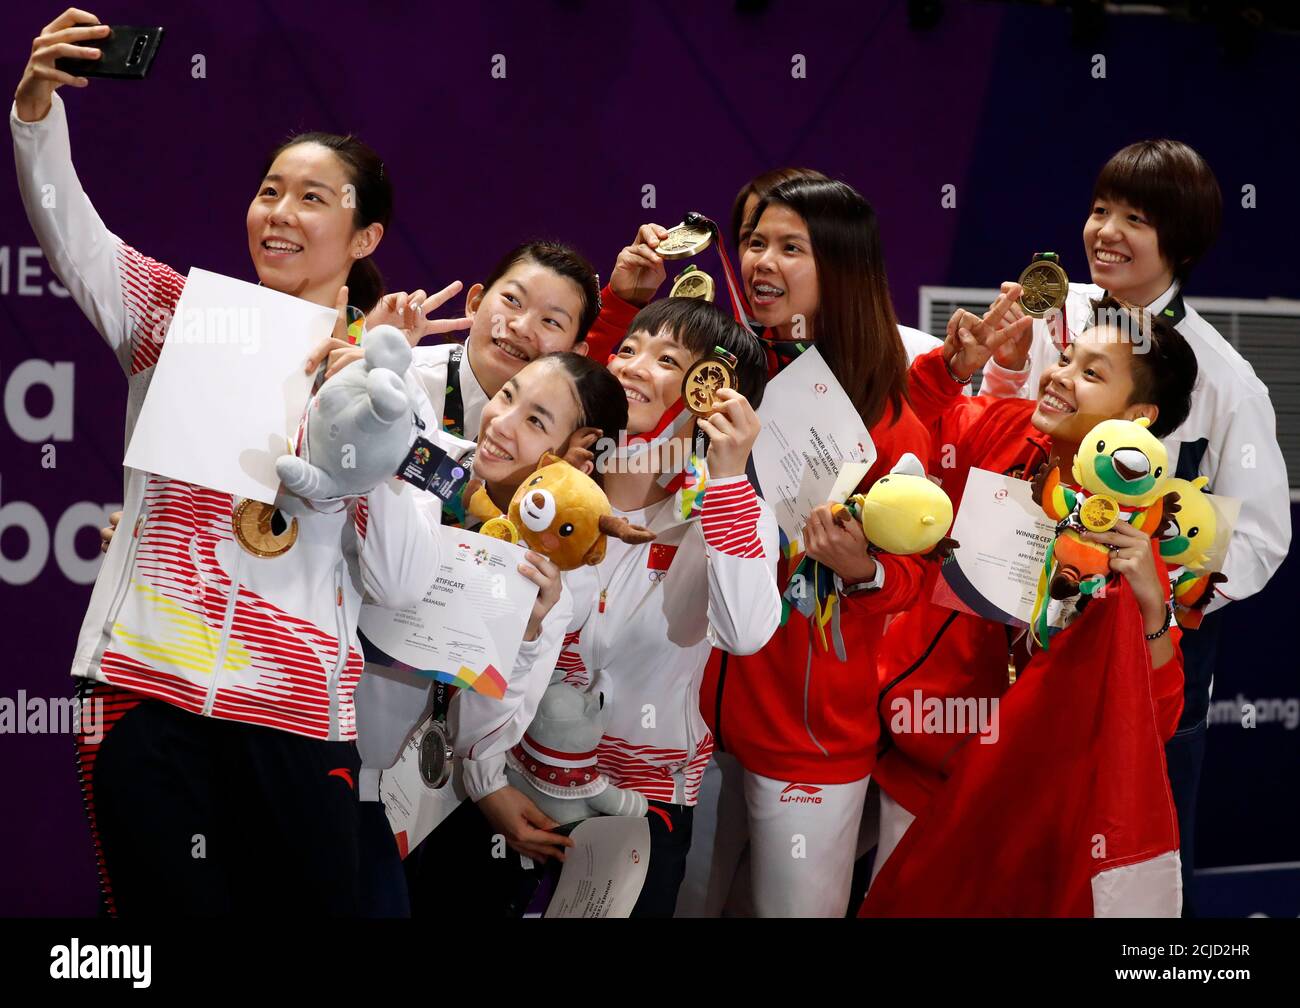 Badminton - 2018 Asian Games - Women's Doubles Medal Ceremony - GBK -  Istora - Jakarta, Indonesia - August 27, 2018 - Gold medalists Chen  Qingchen and Jia Yifan of China, silver